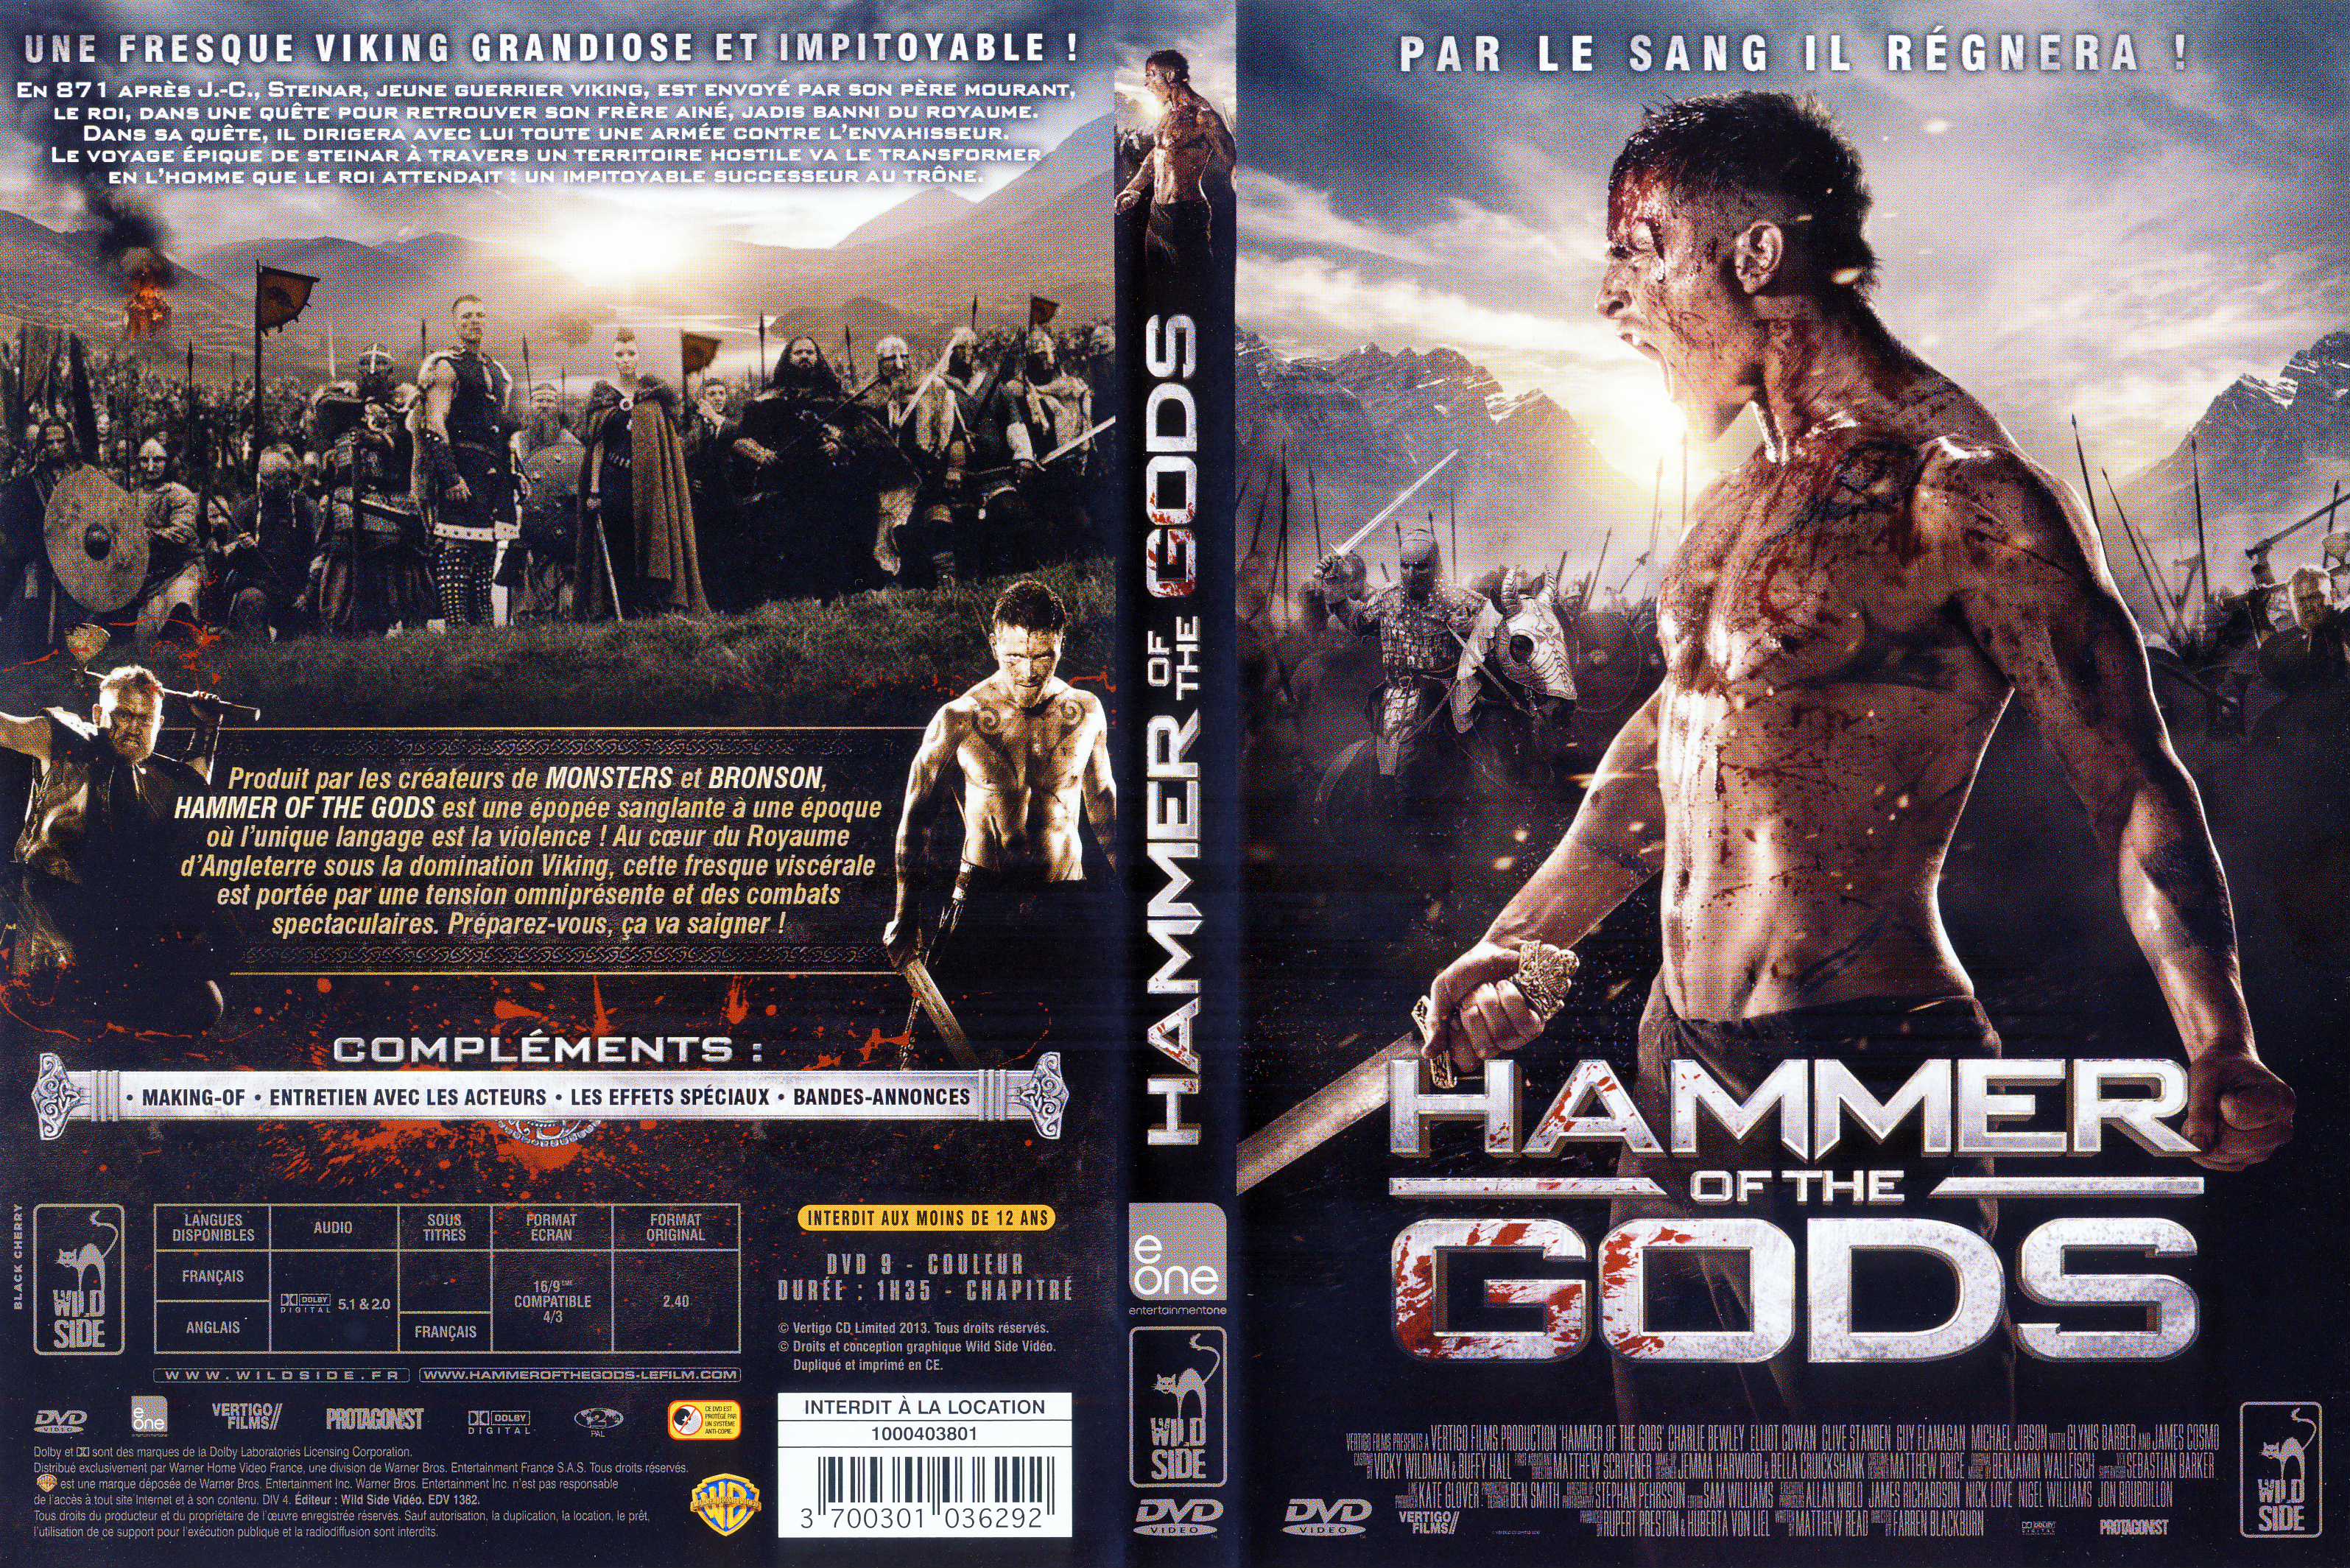 Jaquette DVD Hammer of the Gods